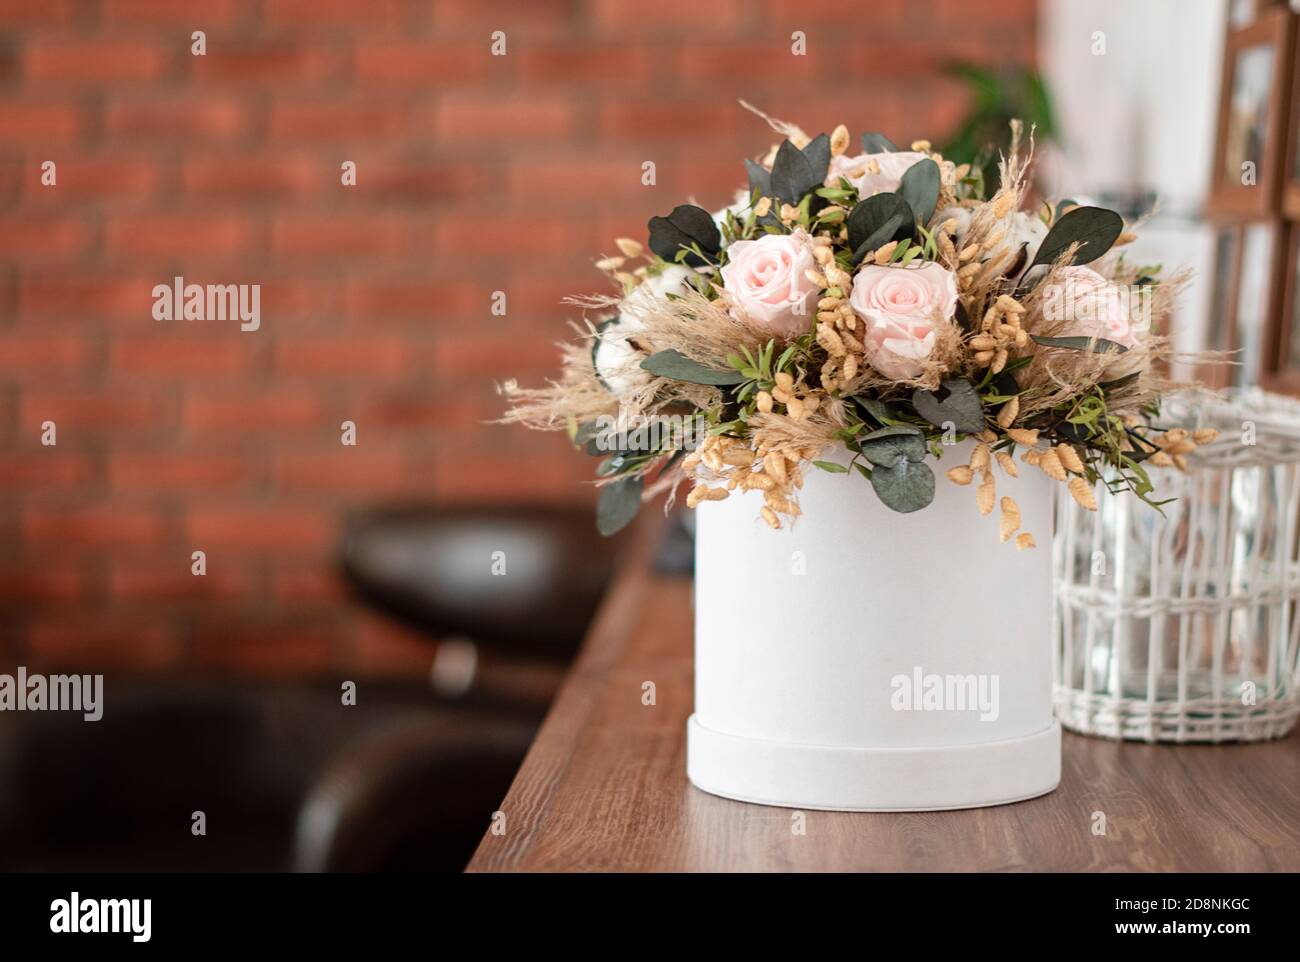 Long lasting flowers decoration. Preserved roses bouquet closeup. Selective focus on home decoration made of decorative plants. Eternal, stabilized, f Stock Photo